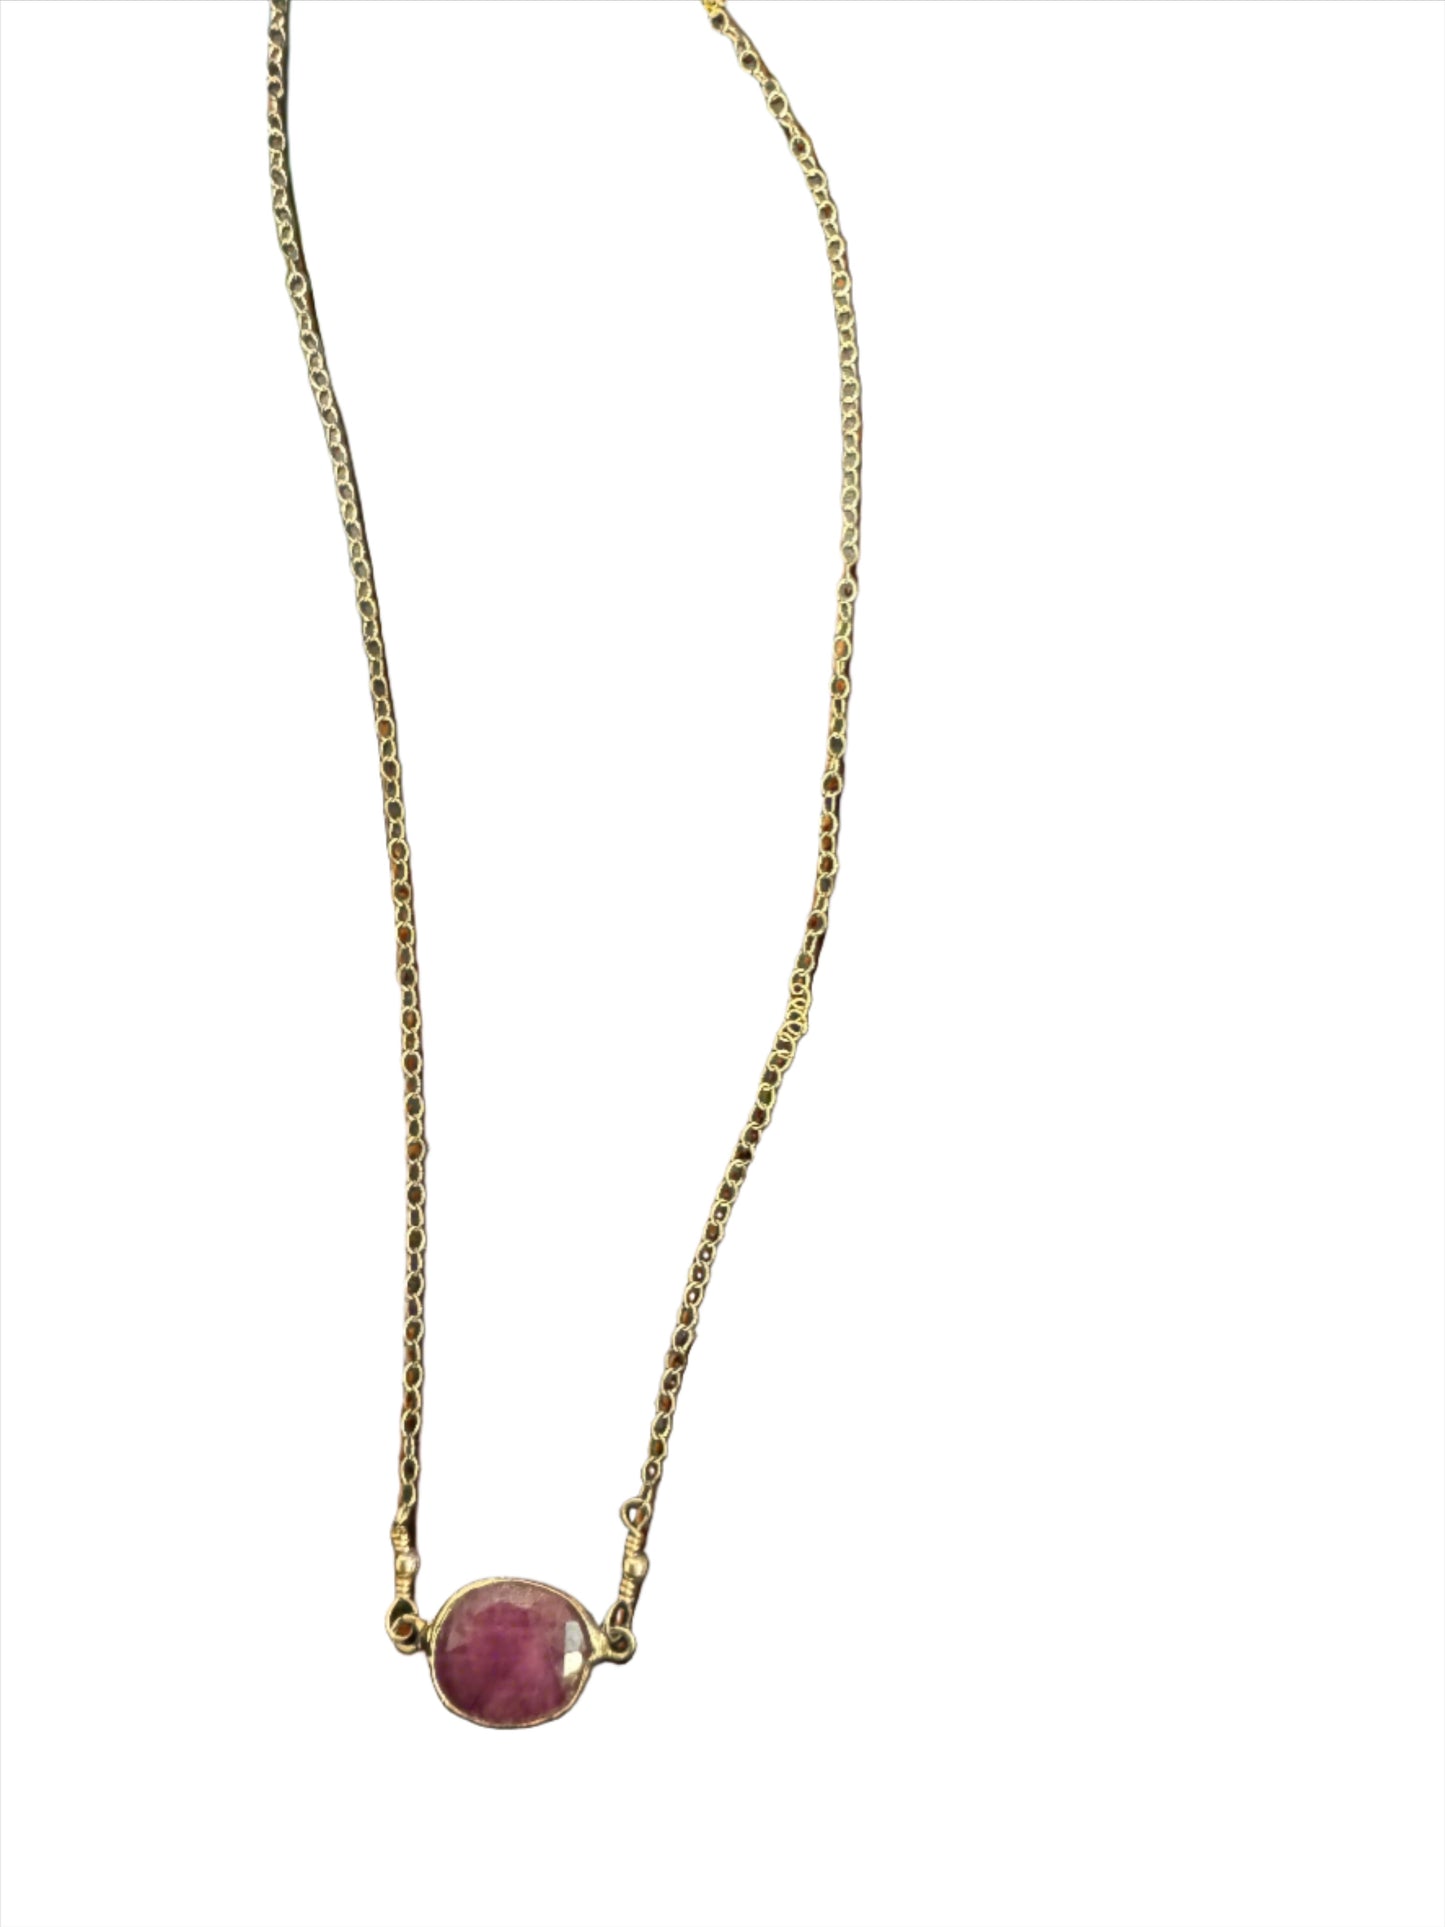 African Sapphire Pink Center Stone Necklace Gold Fill